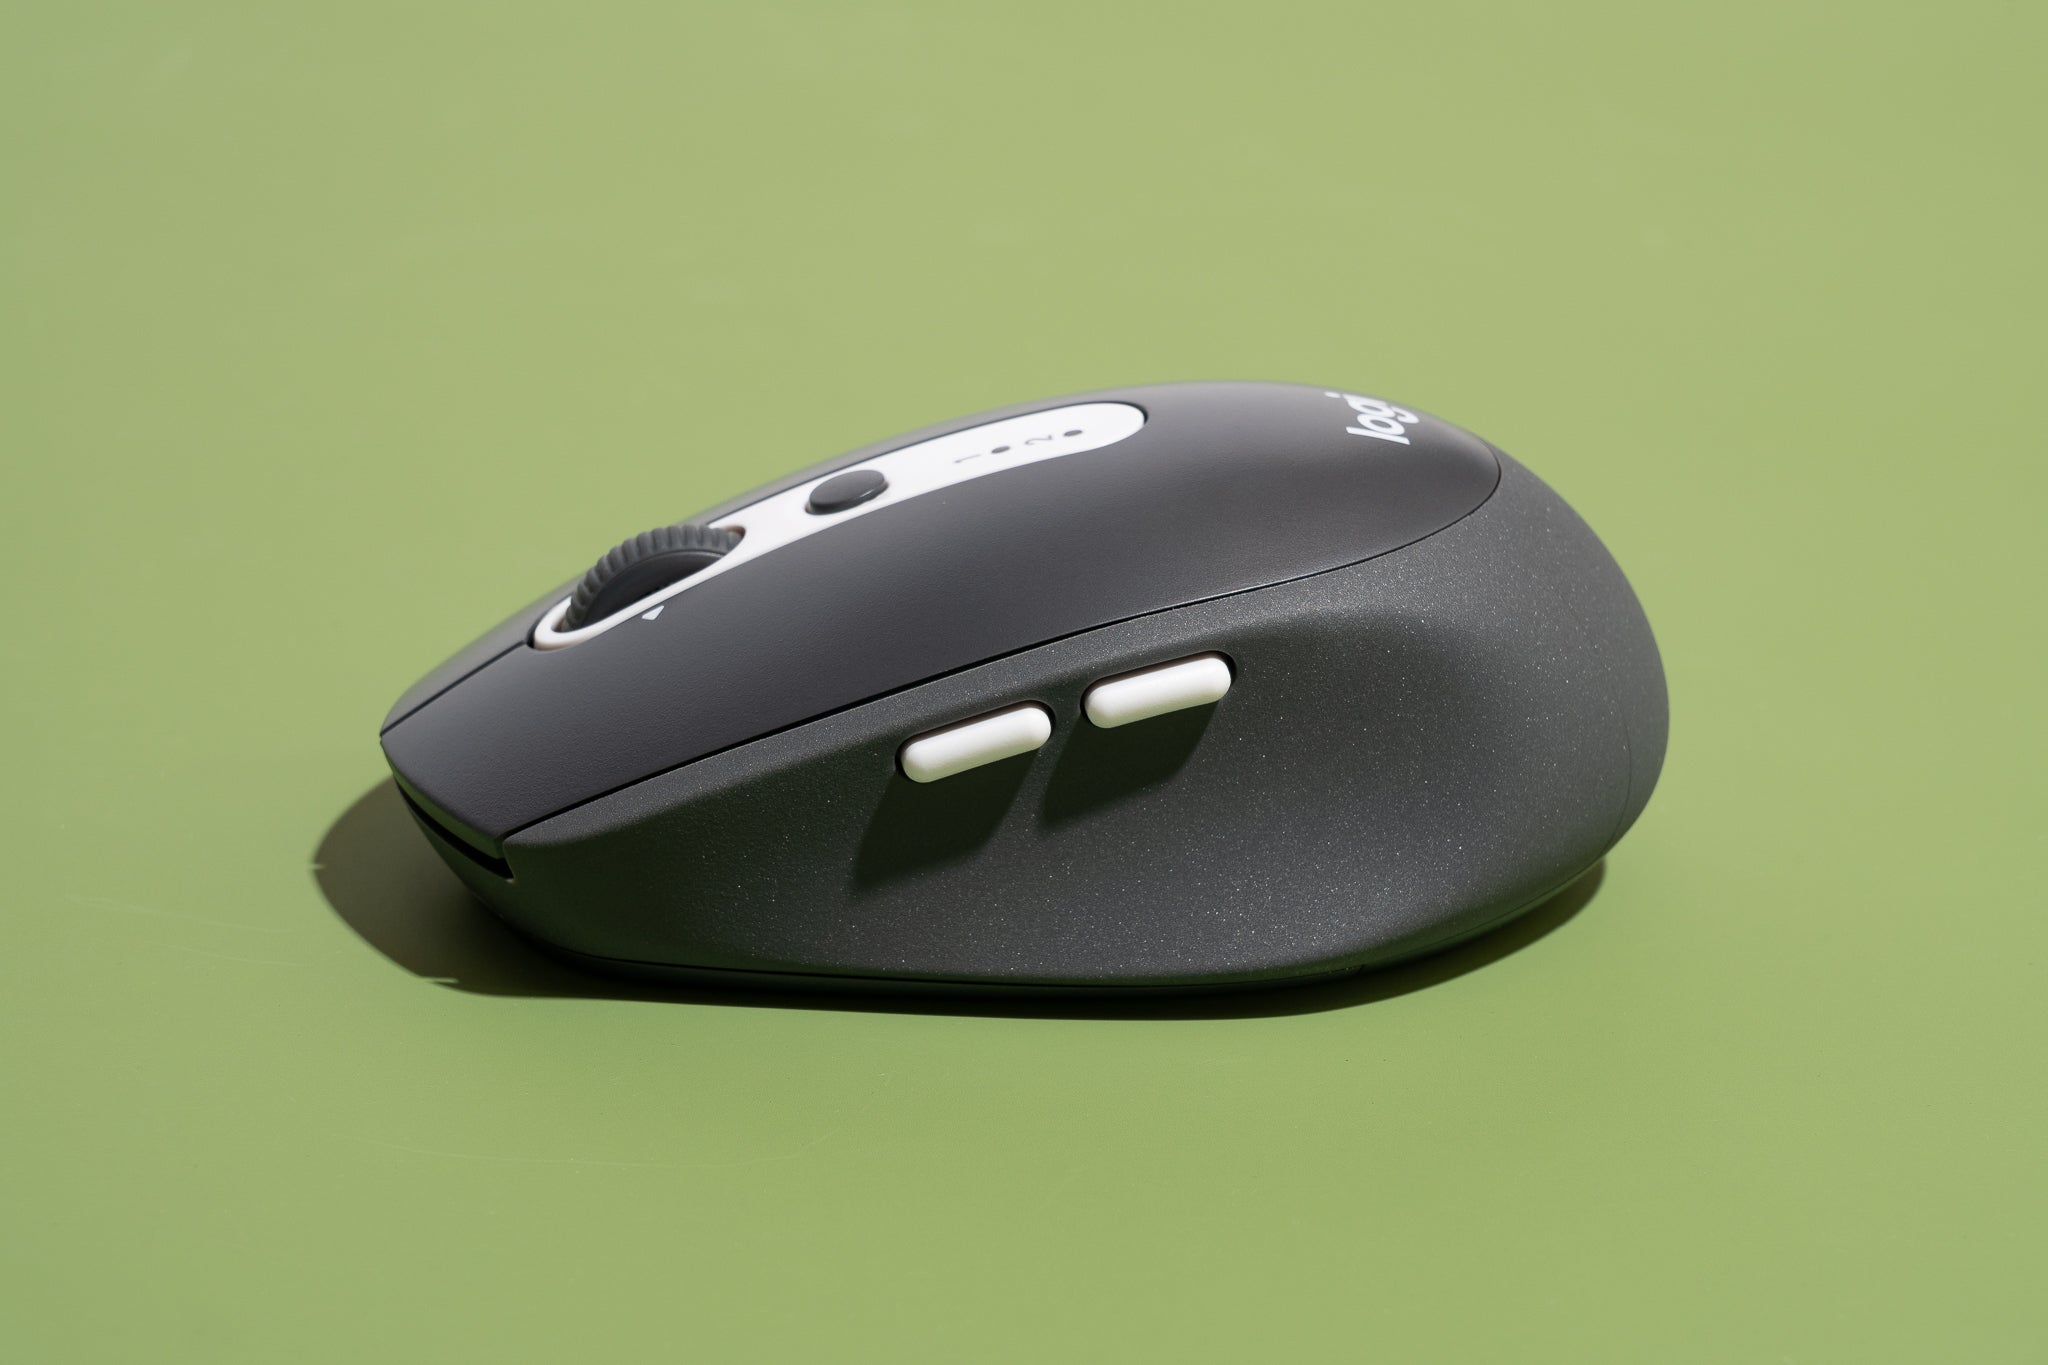 most comfortable mouse for mac